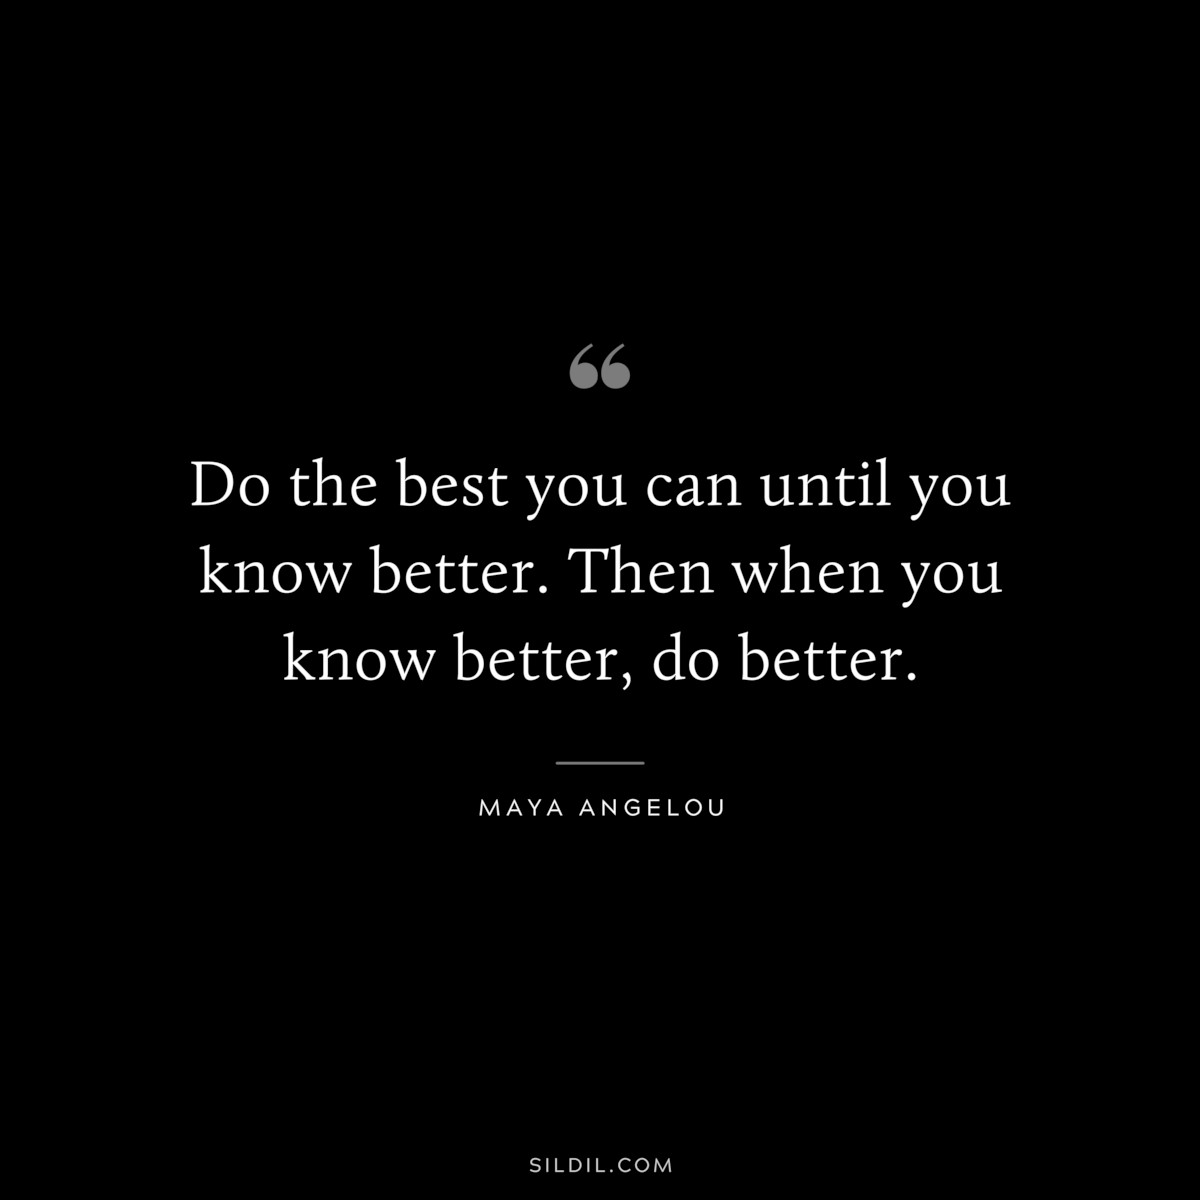 Do the best you can until you know better. Then when you know better, do better. ― Maya Angelou